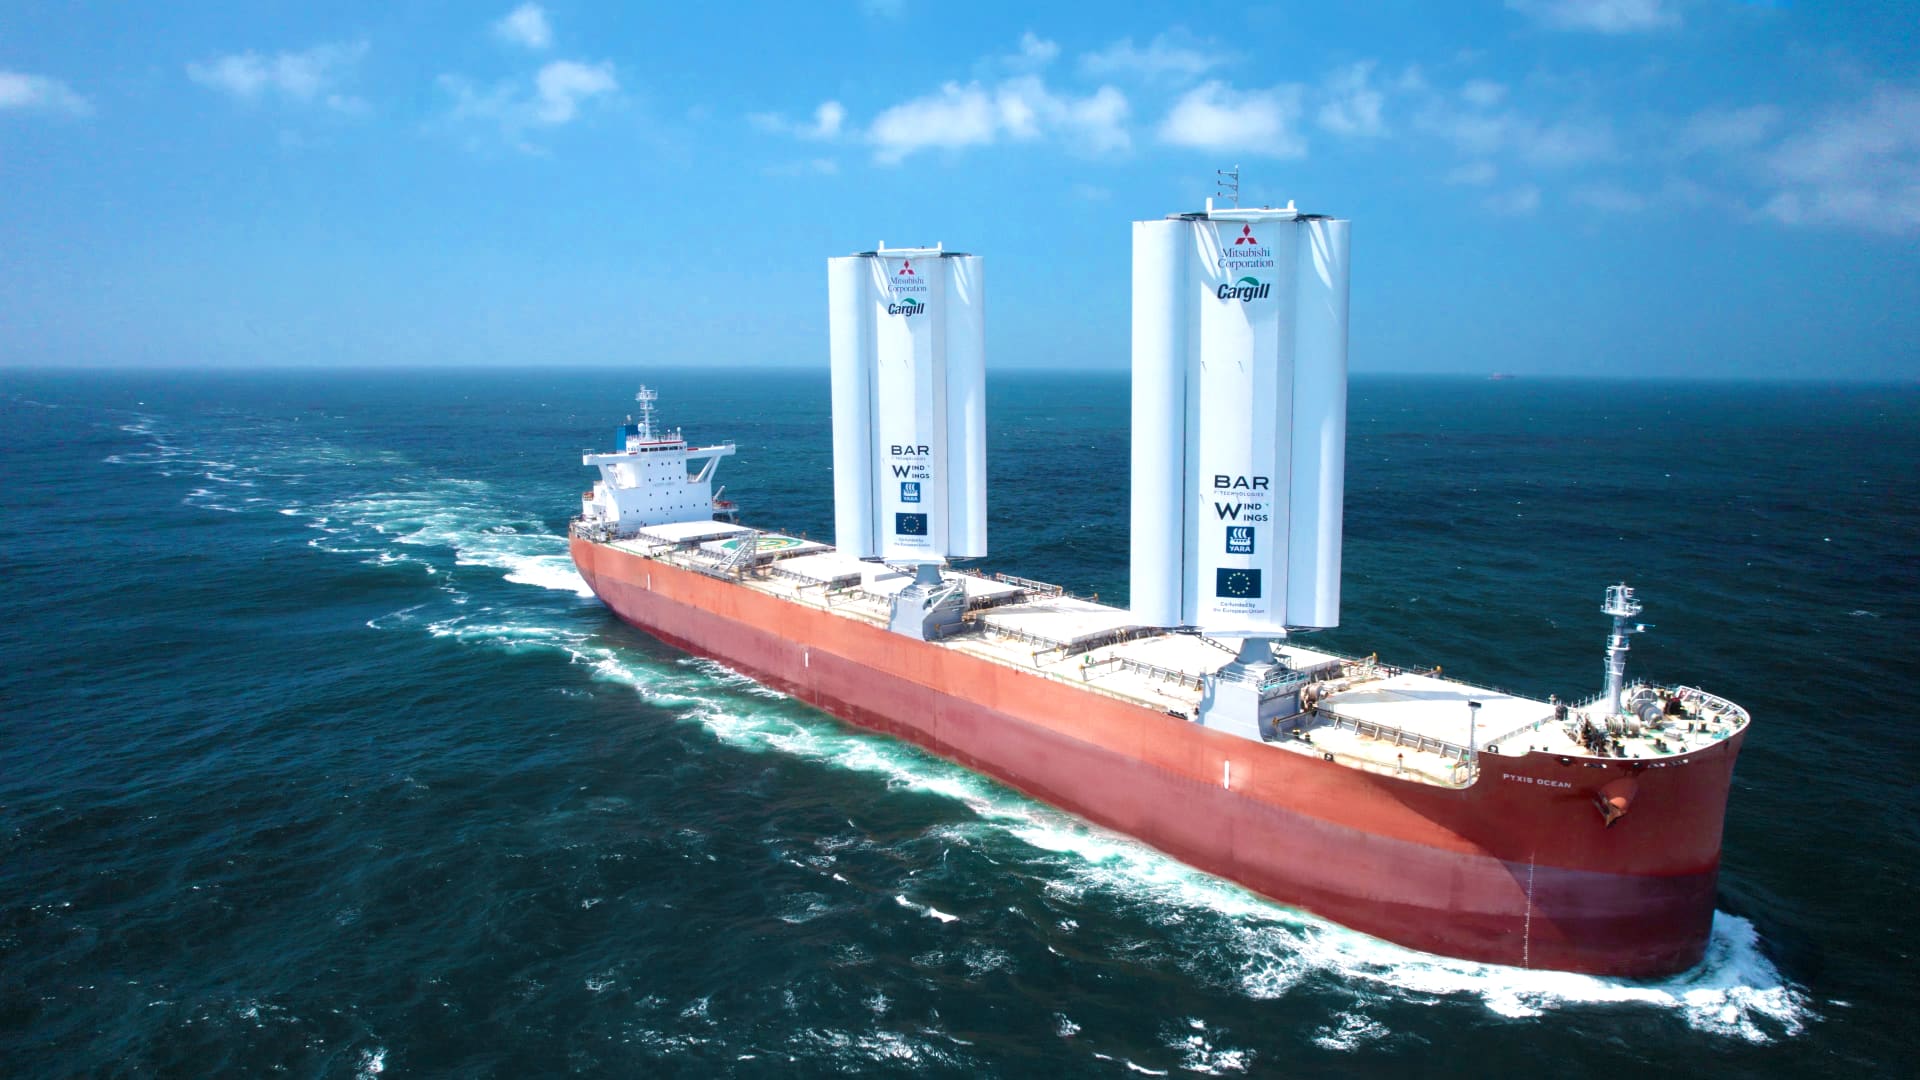 Wind-powered cargo ships with sail-like 'wings' could reduce fuel use by 30%